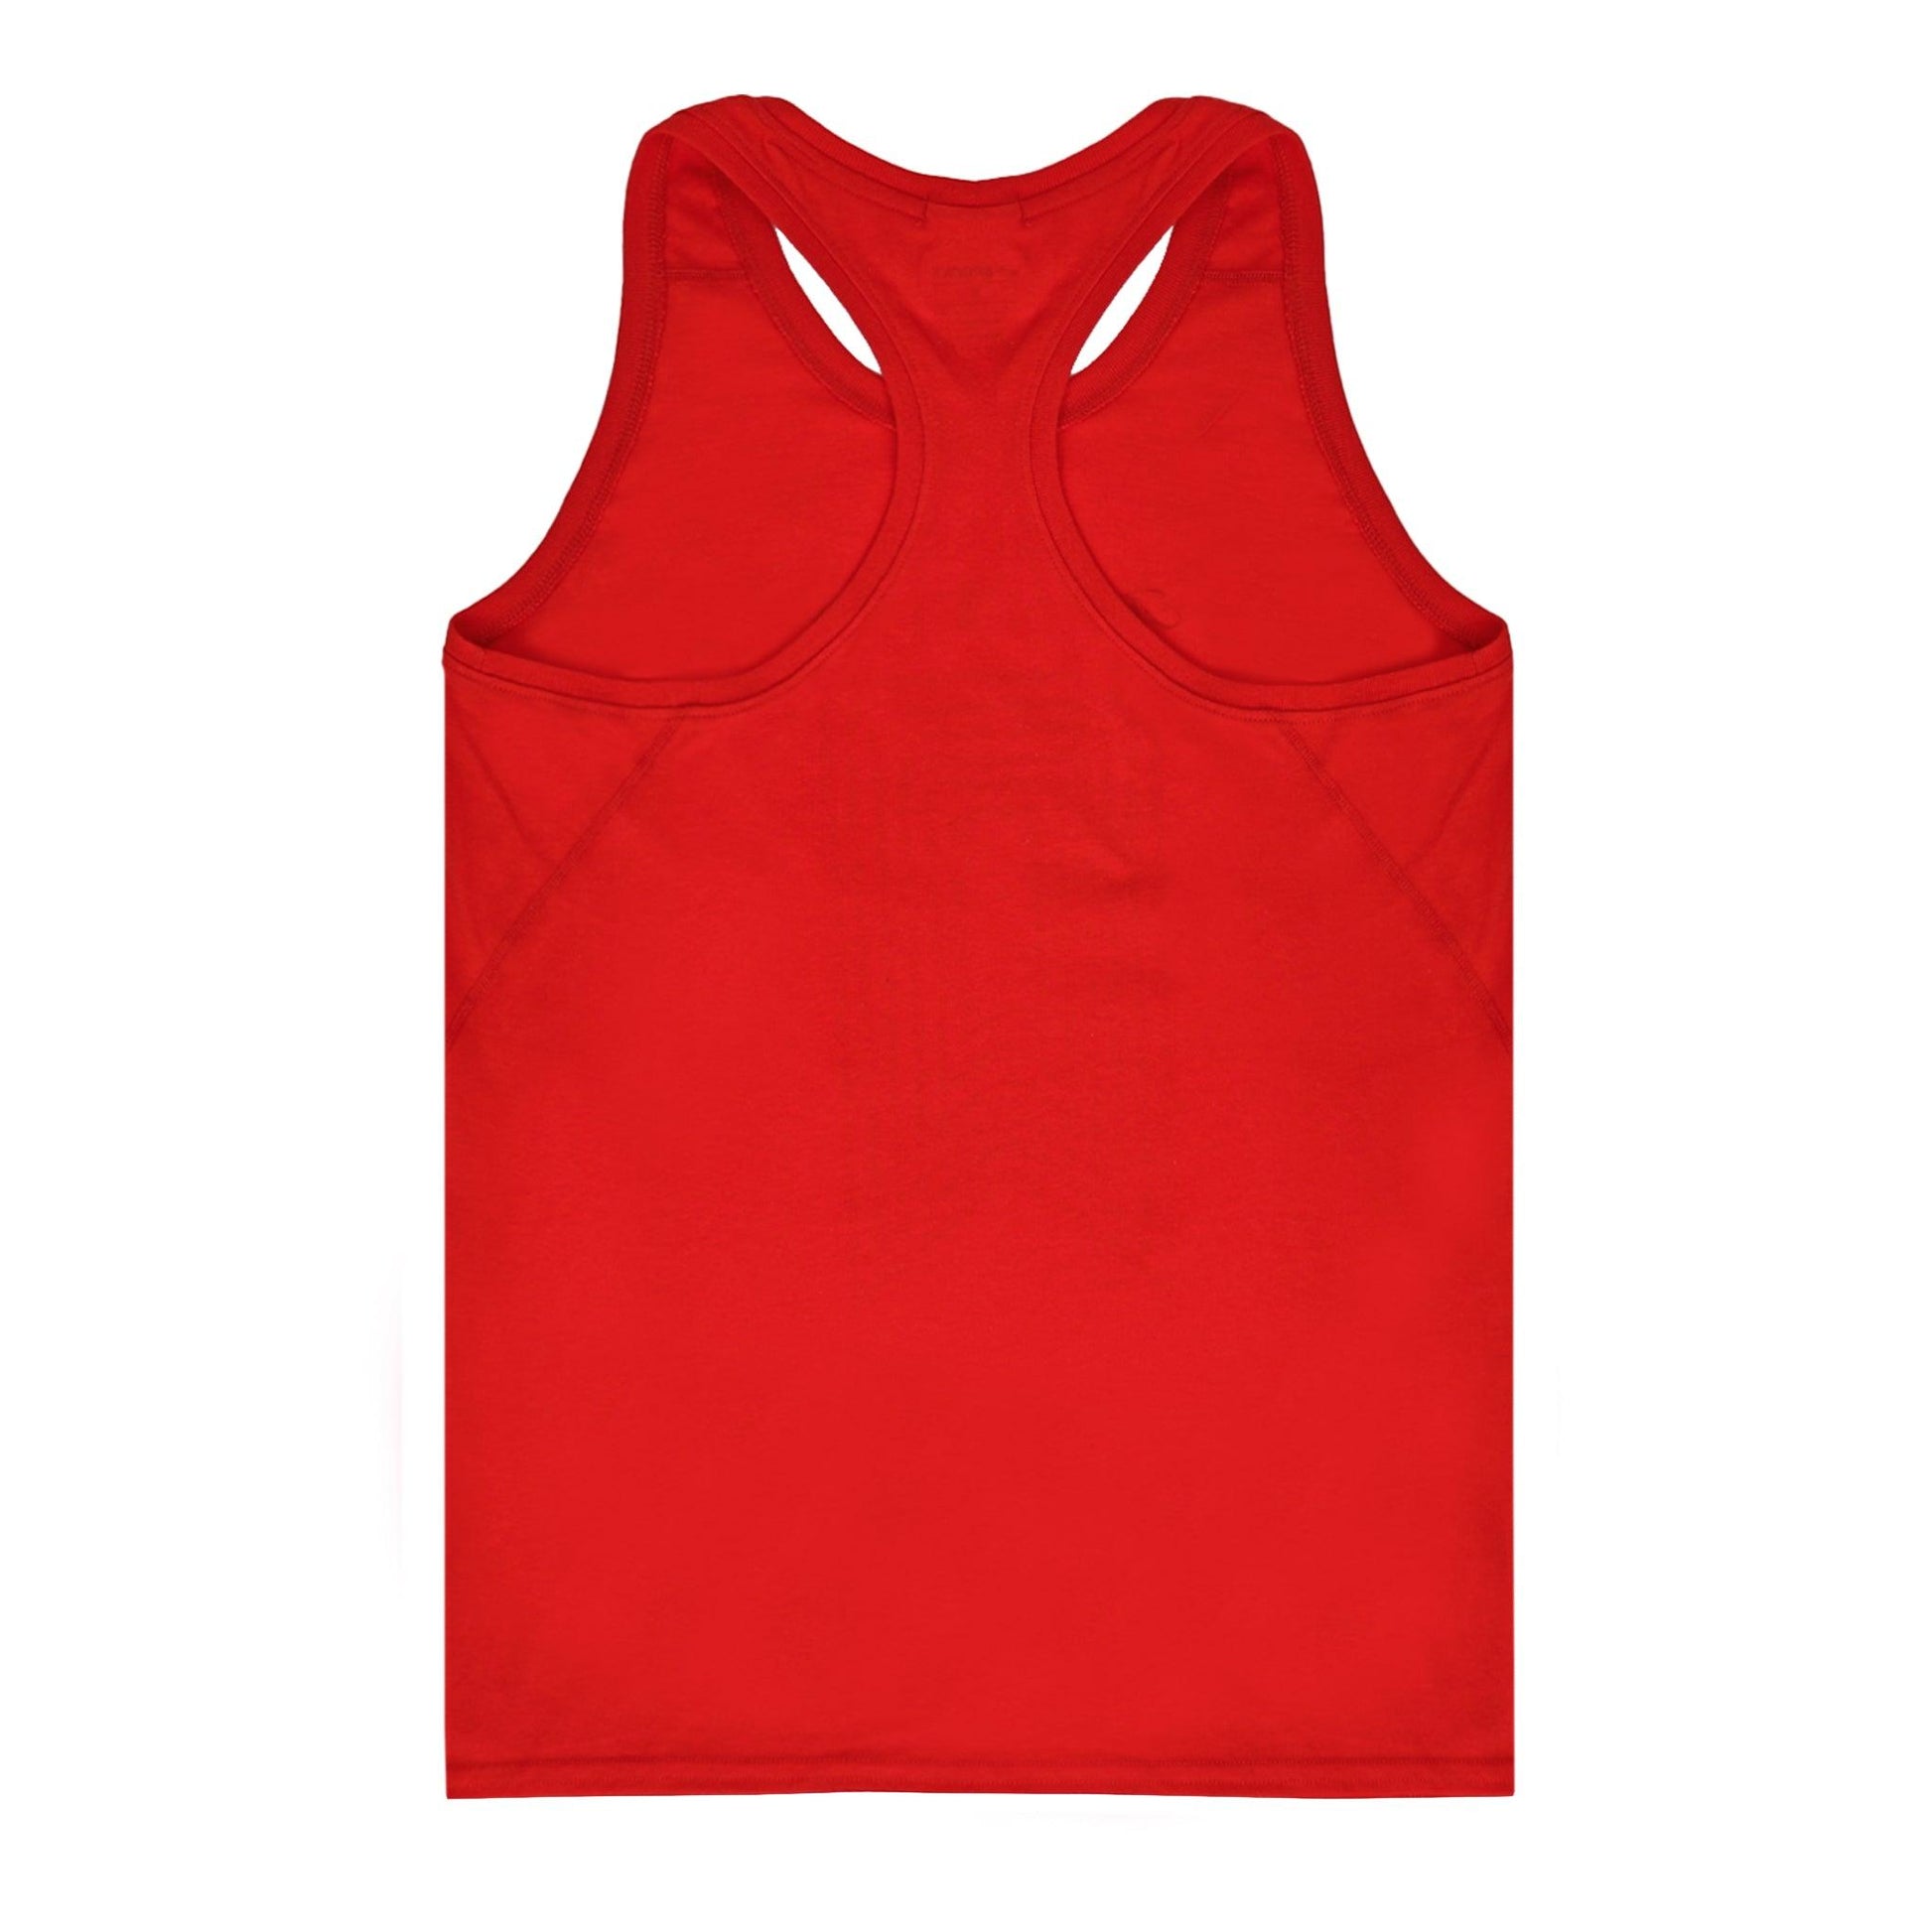 michelob-ultra-brooks-training-distance-tank-red-back